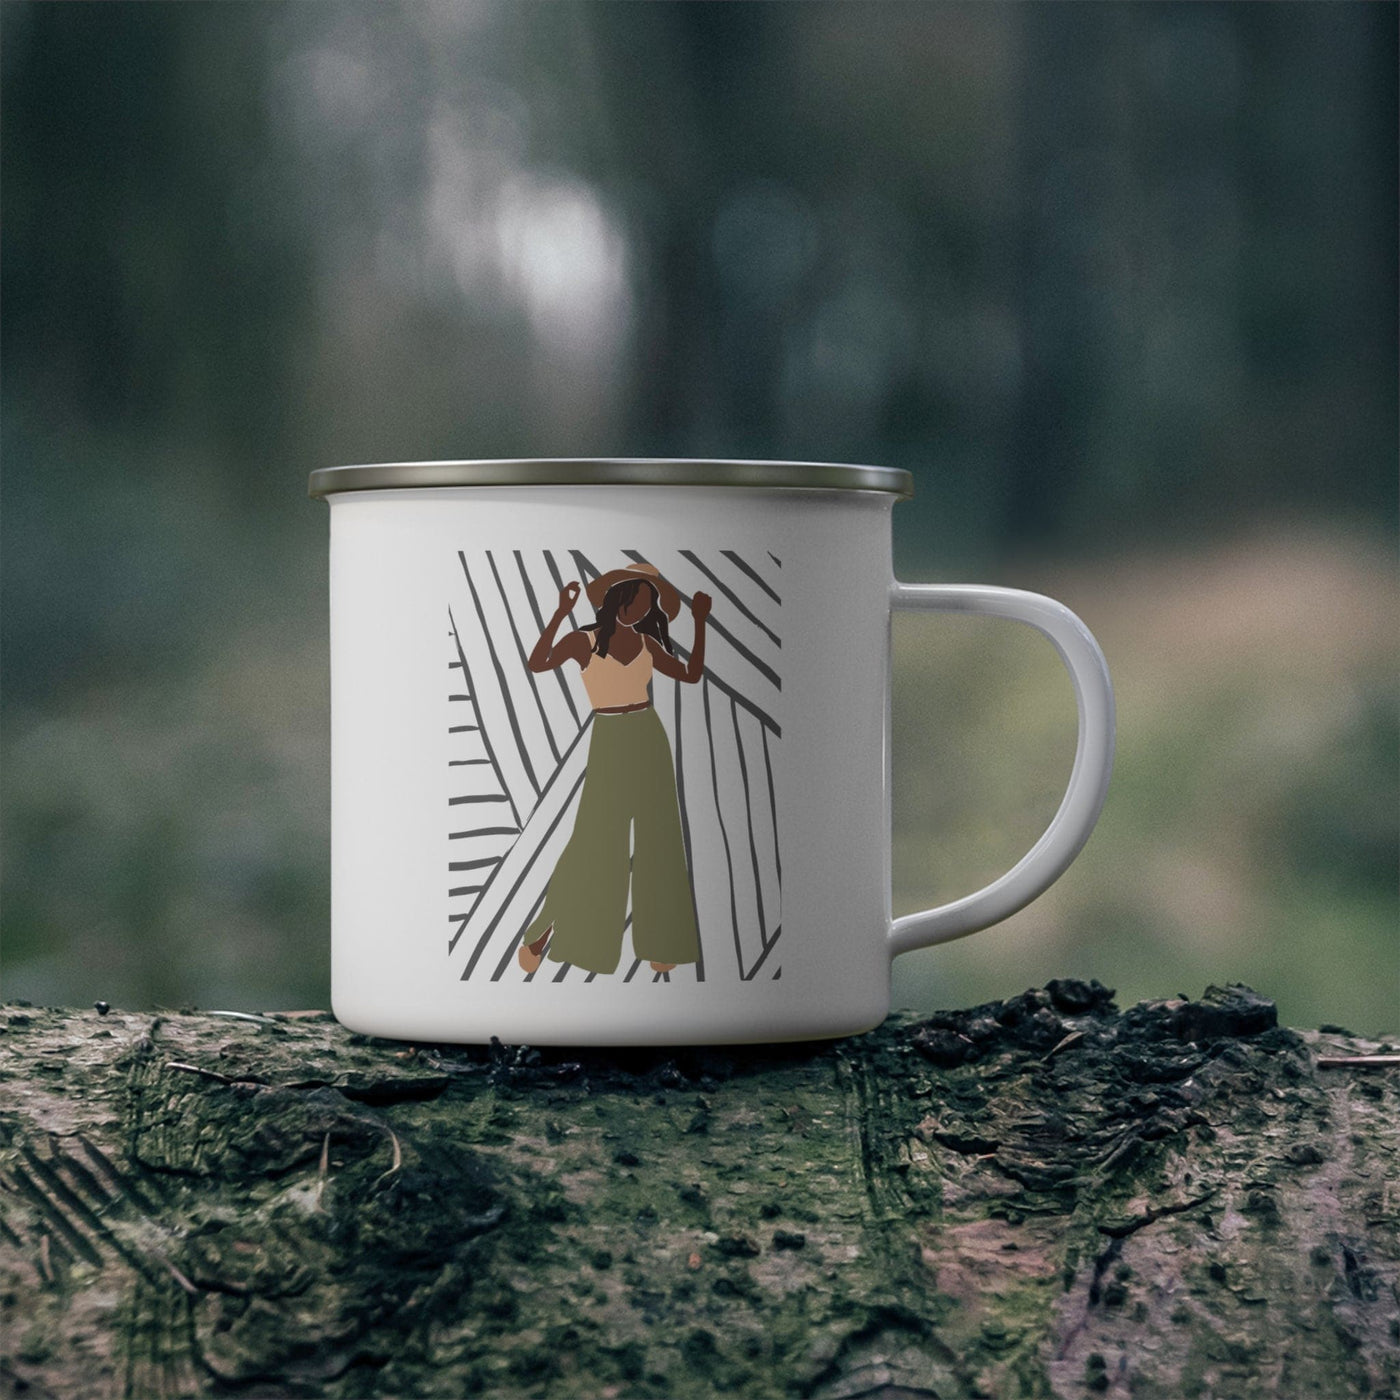 Enamel Camping Mug Say It Soul Its Her Groove Thing Positive Inspiration